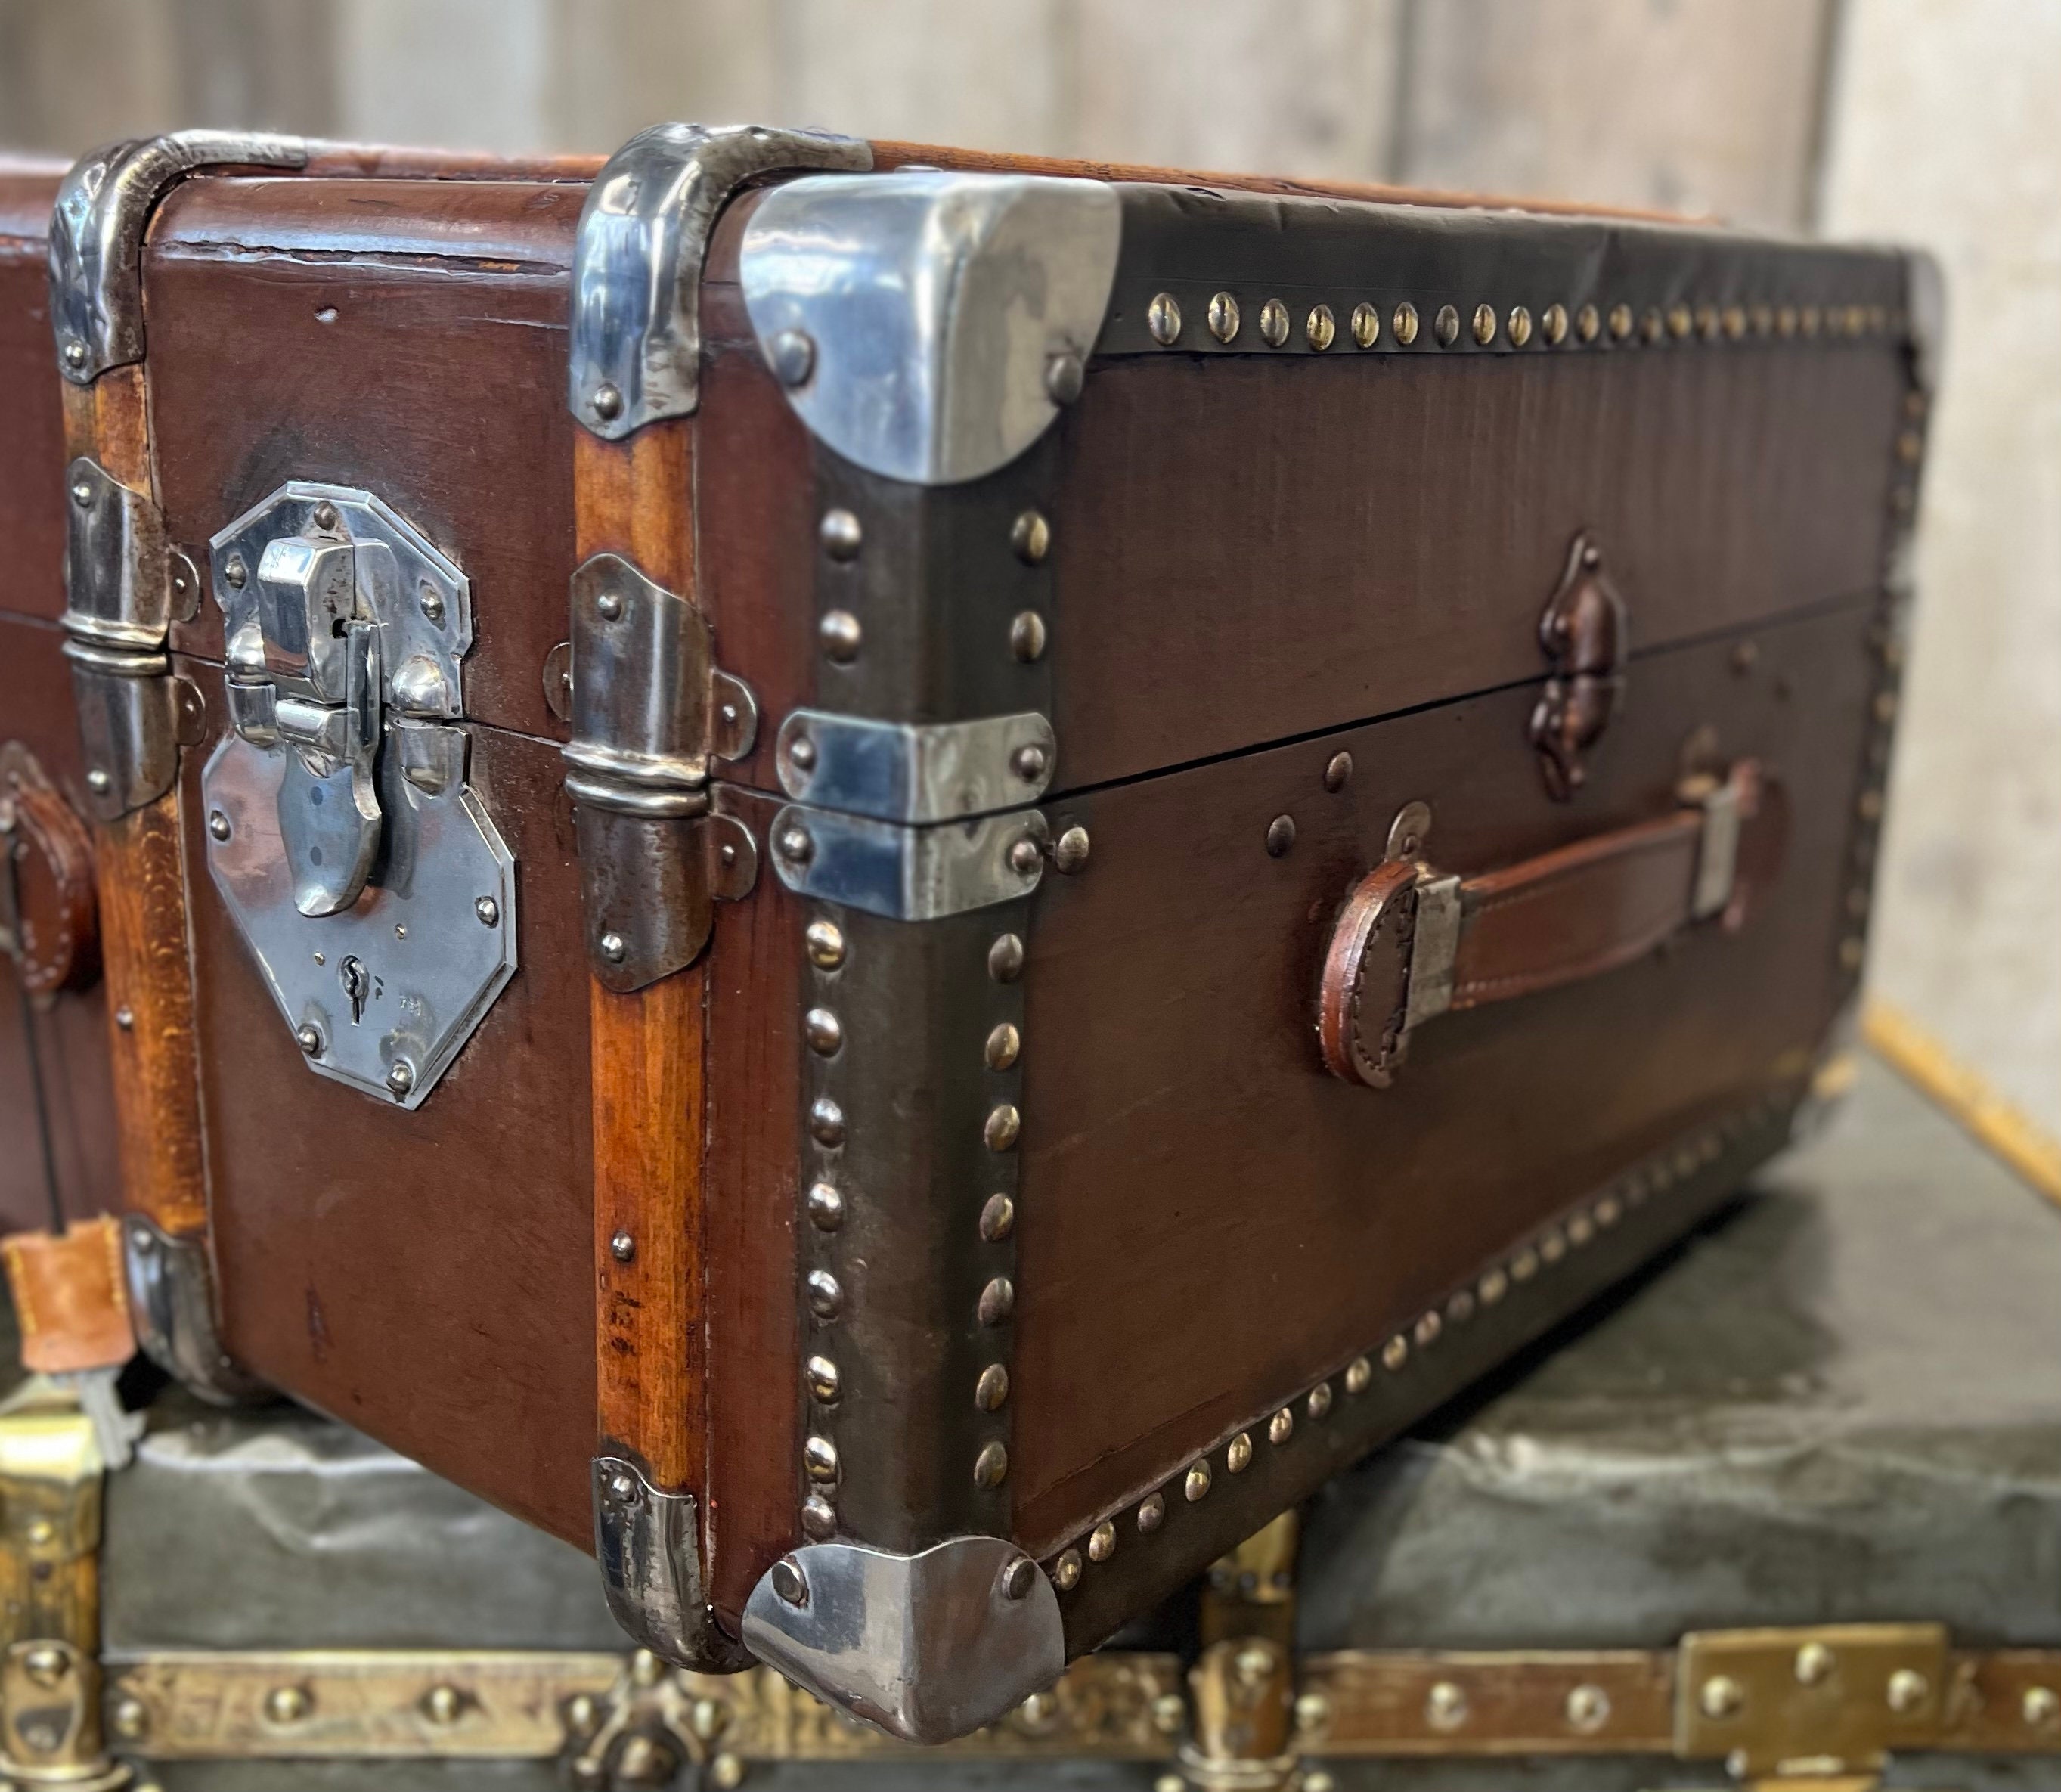 $1 to $1 Billion Holiday Gift Guide: Classic Travel Trunk a la the